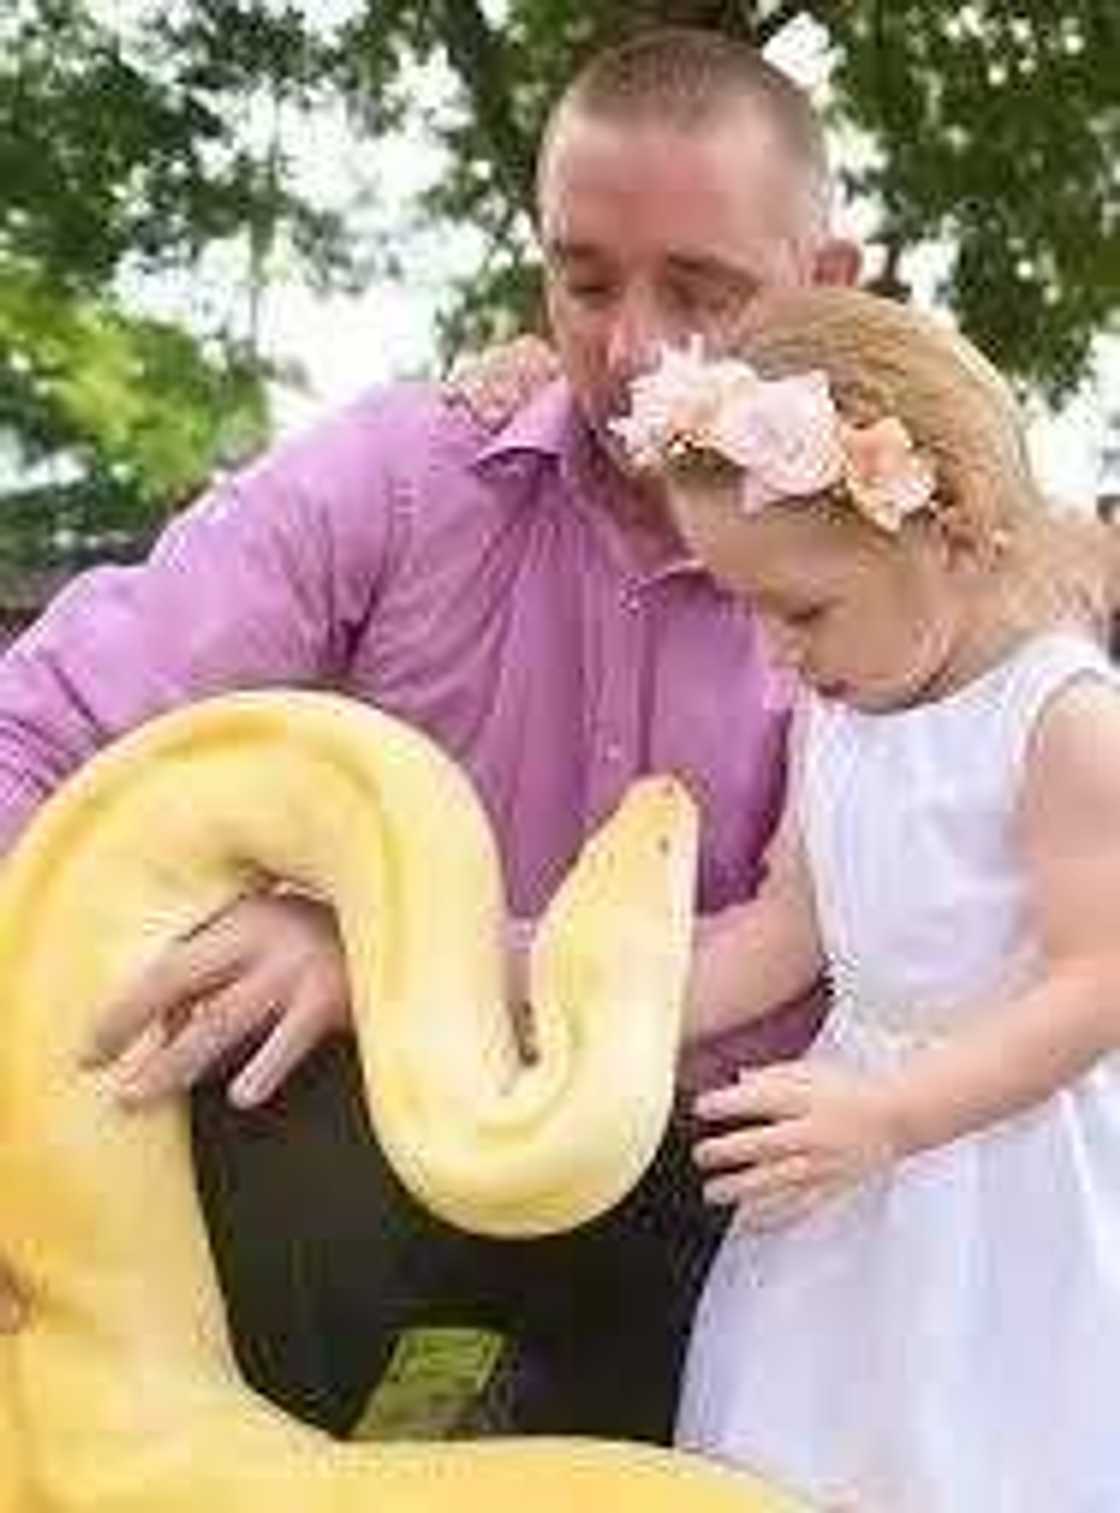 Meet Two Year Old With Guts To Kiss 15FT Snake